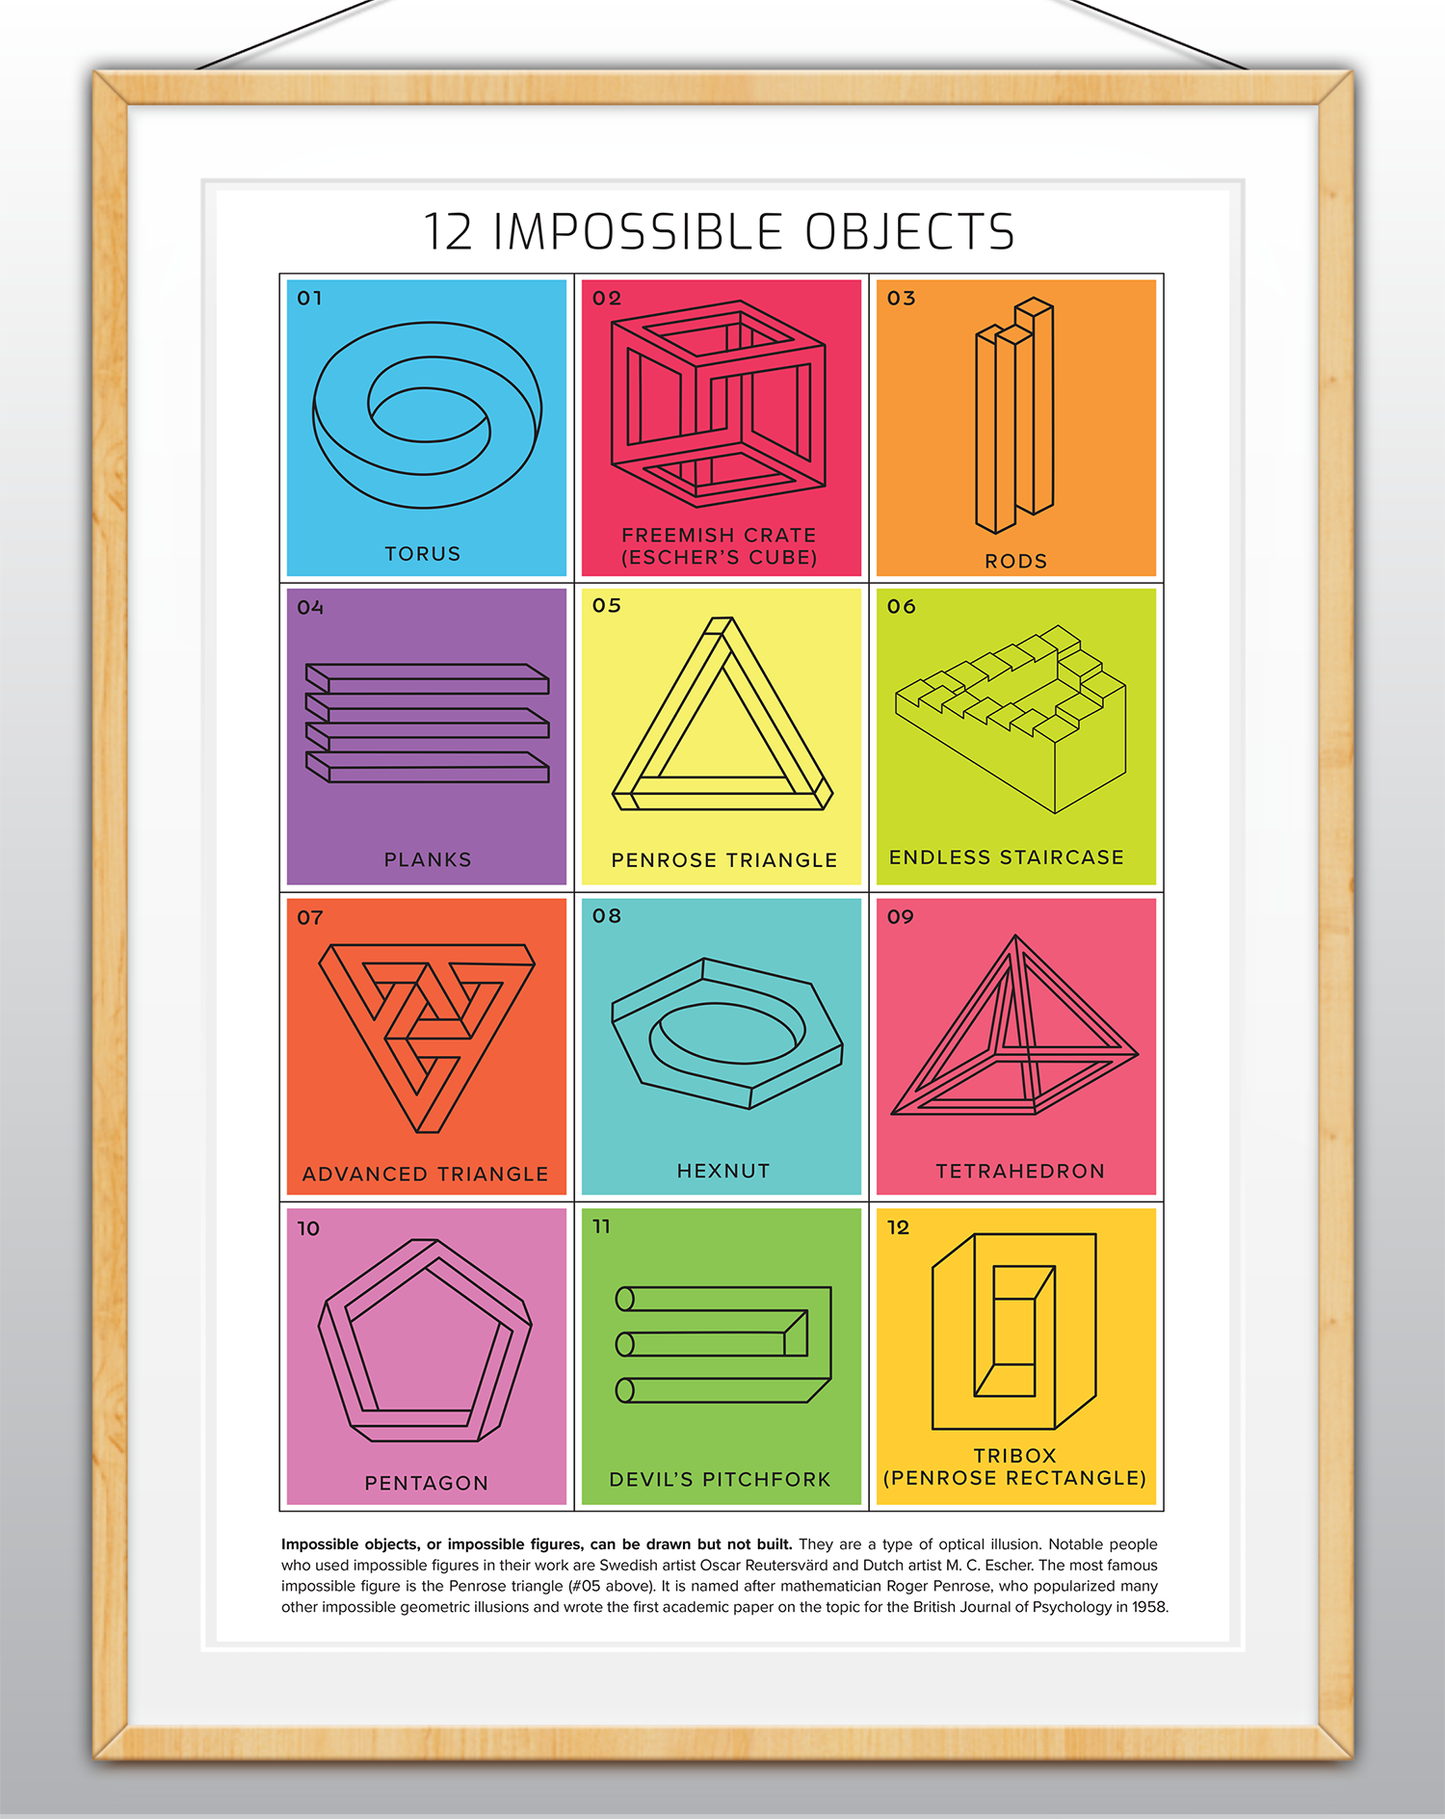 12 IMPOSSIBLE OBJECTS (Printed Poster)